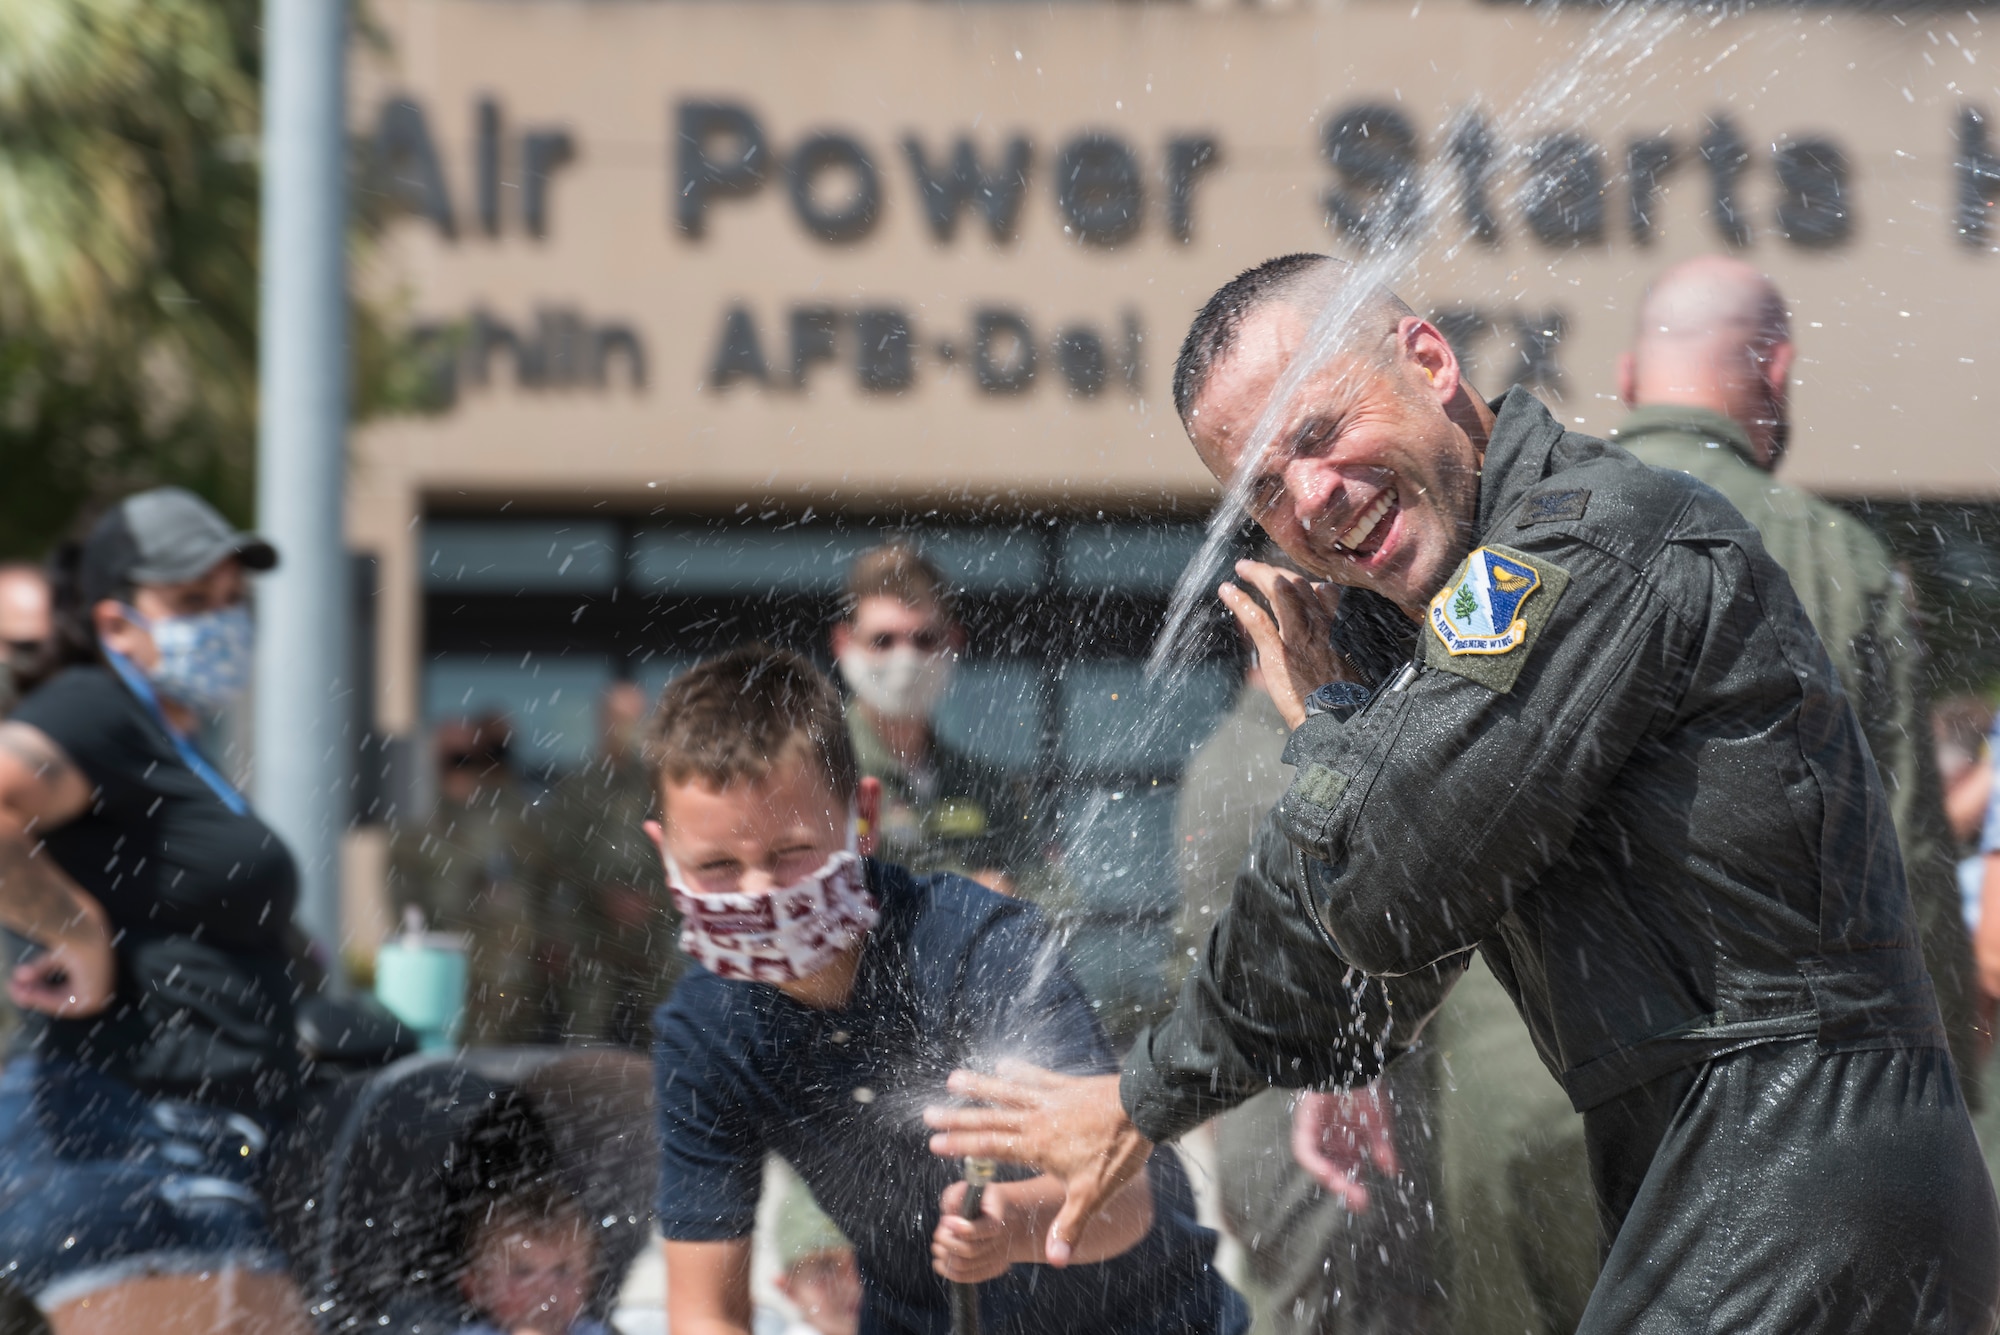 Col. Lee Gentile, 47th Flying Training Wing commander, is doused with water by his son, July 17, 2020 at Laughlin Air Force Base Texas. In celebration of a pilot’s fini flight, it is tradition for his family to shower the pilot with water and champagne. (U.S. Air Force photo by Senior Airman Anne McCready)